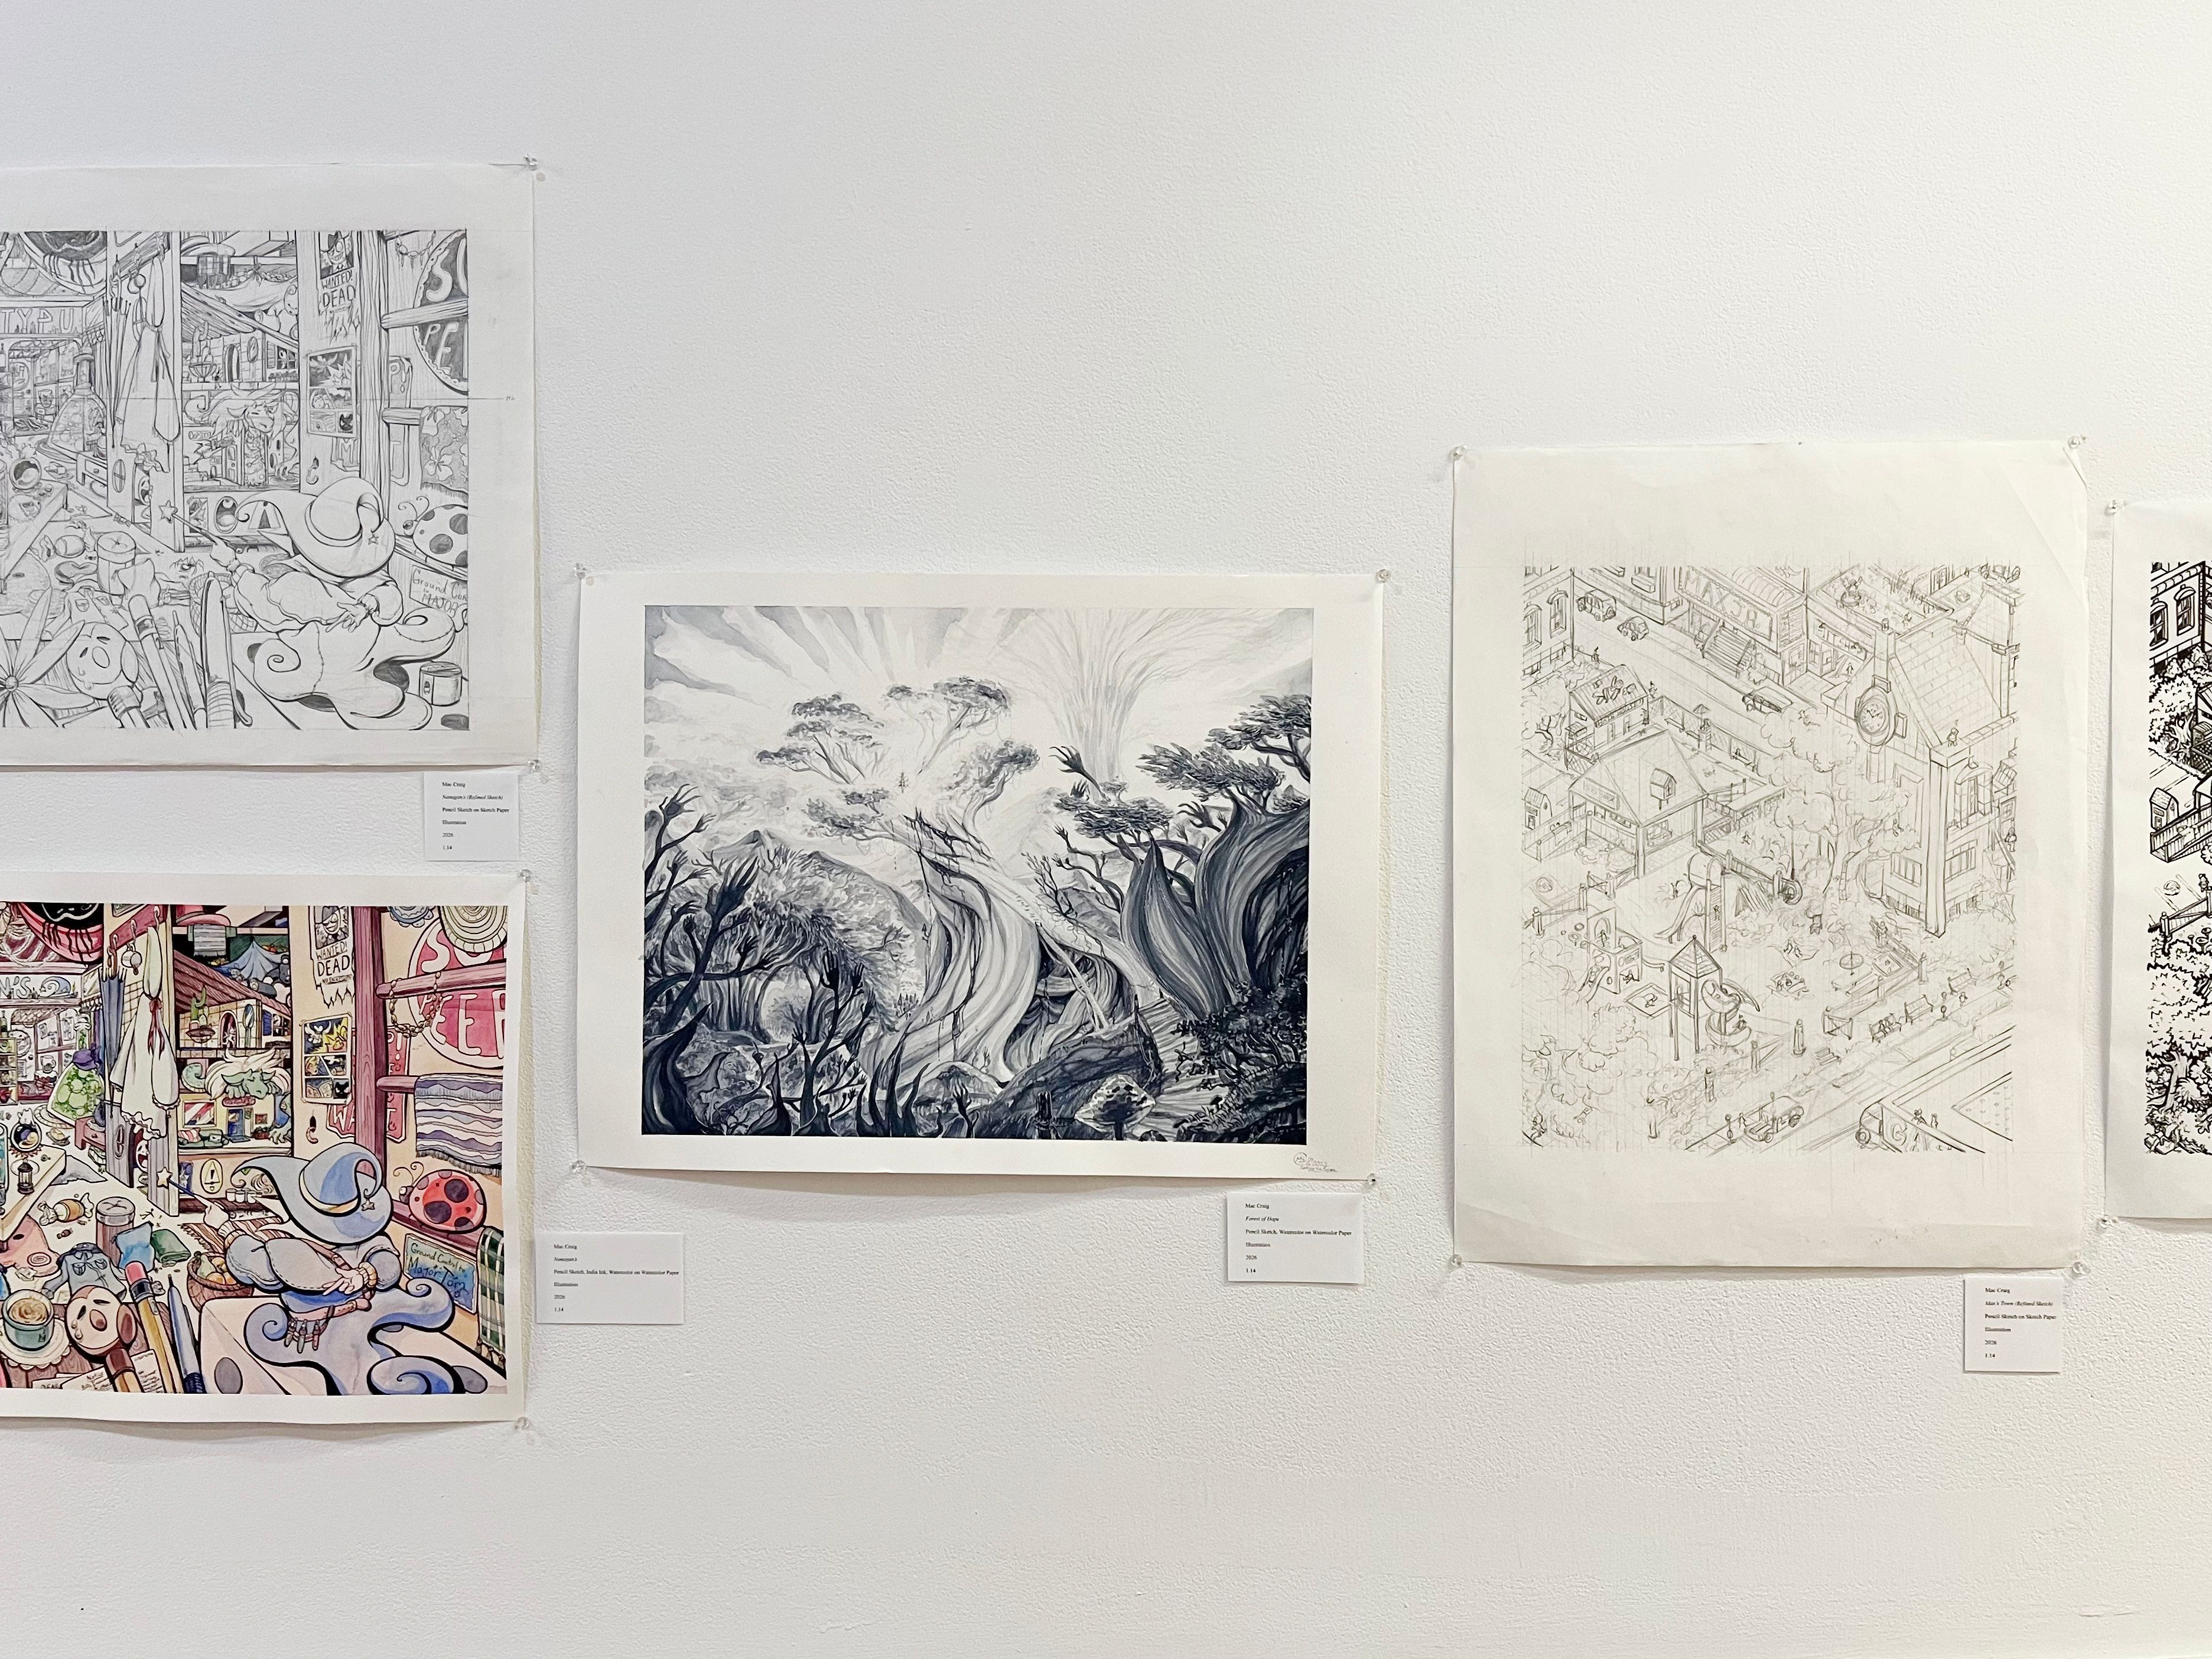 An installation of illustrations, one depicts a growing forest, one a room, another an isometric cityscape.